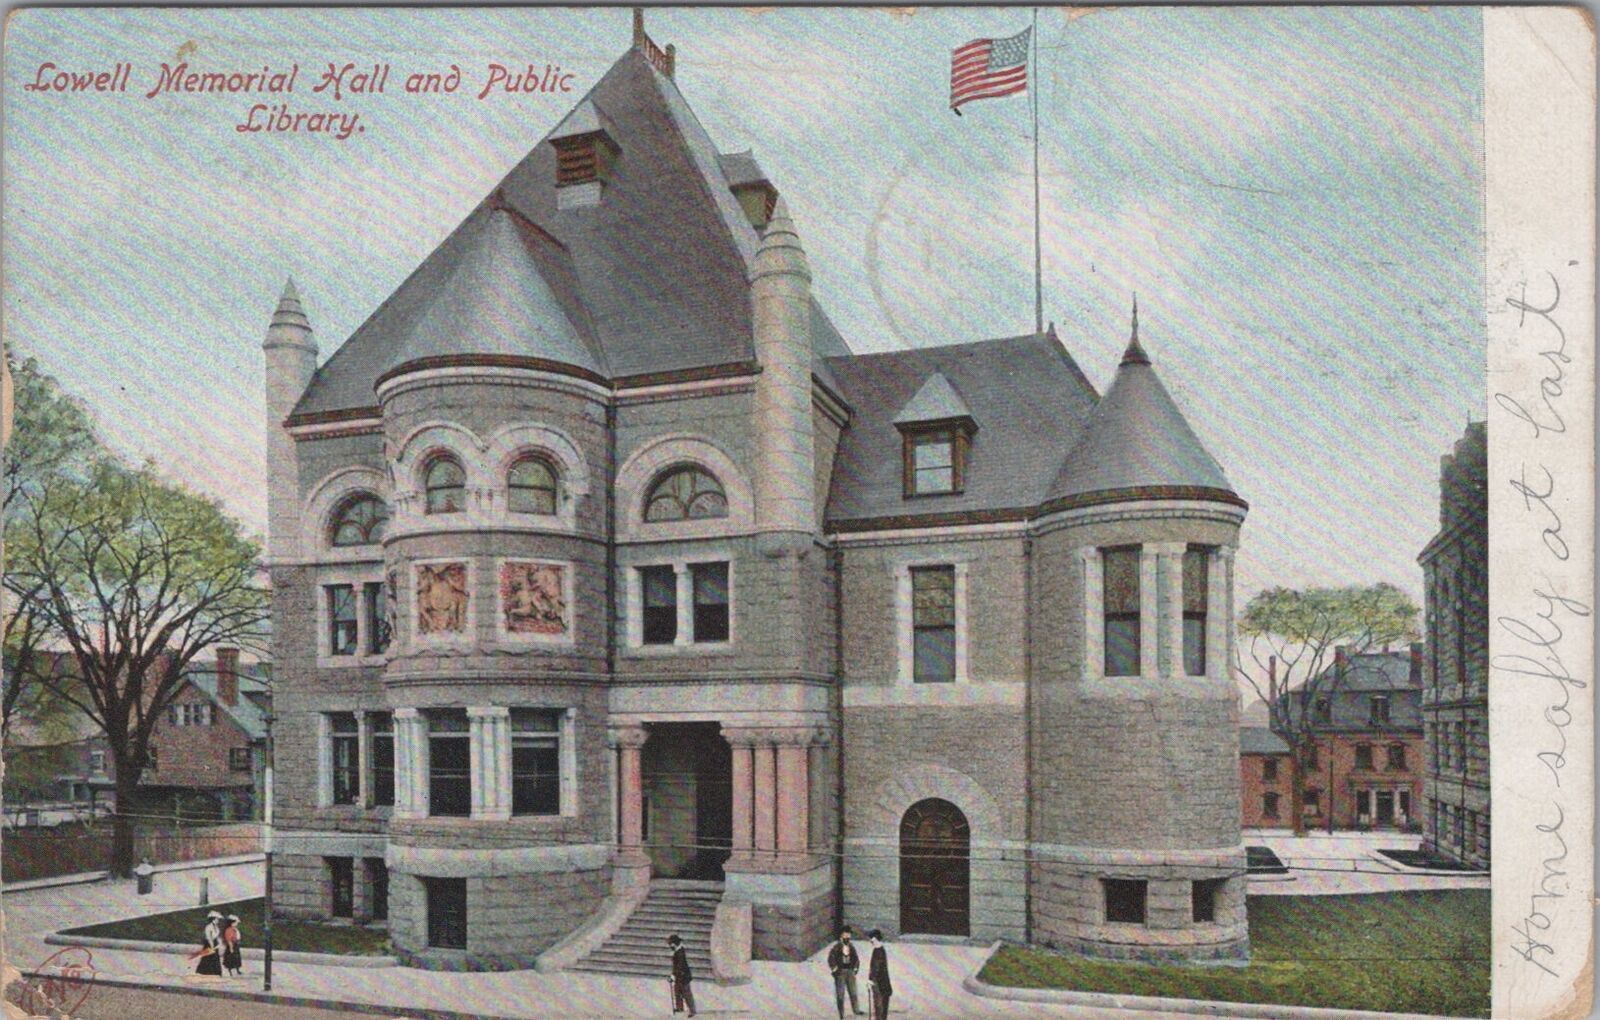 Lowell Memorial Hall and Public Library 1906 Postcard